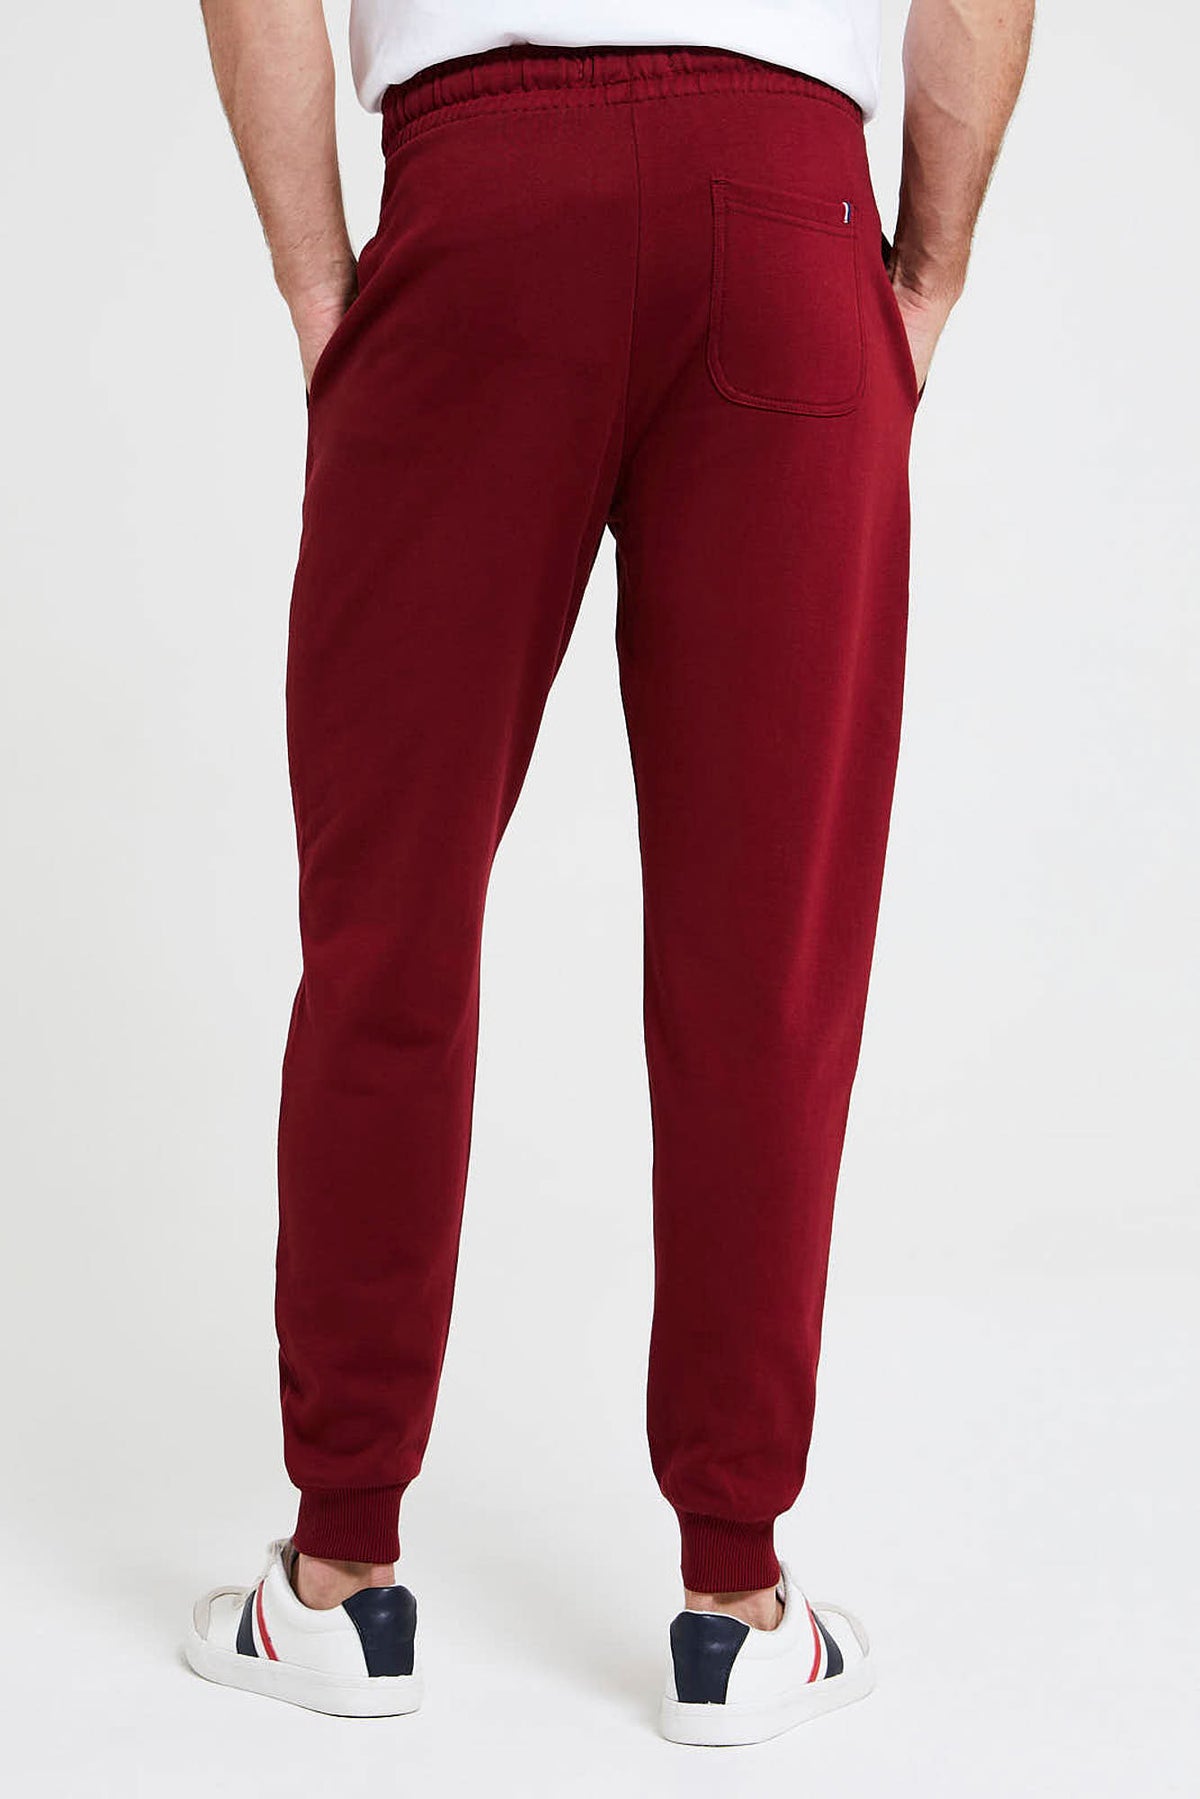 Mens Player 3 Joggers in Biking Red